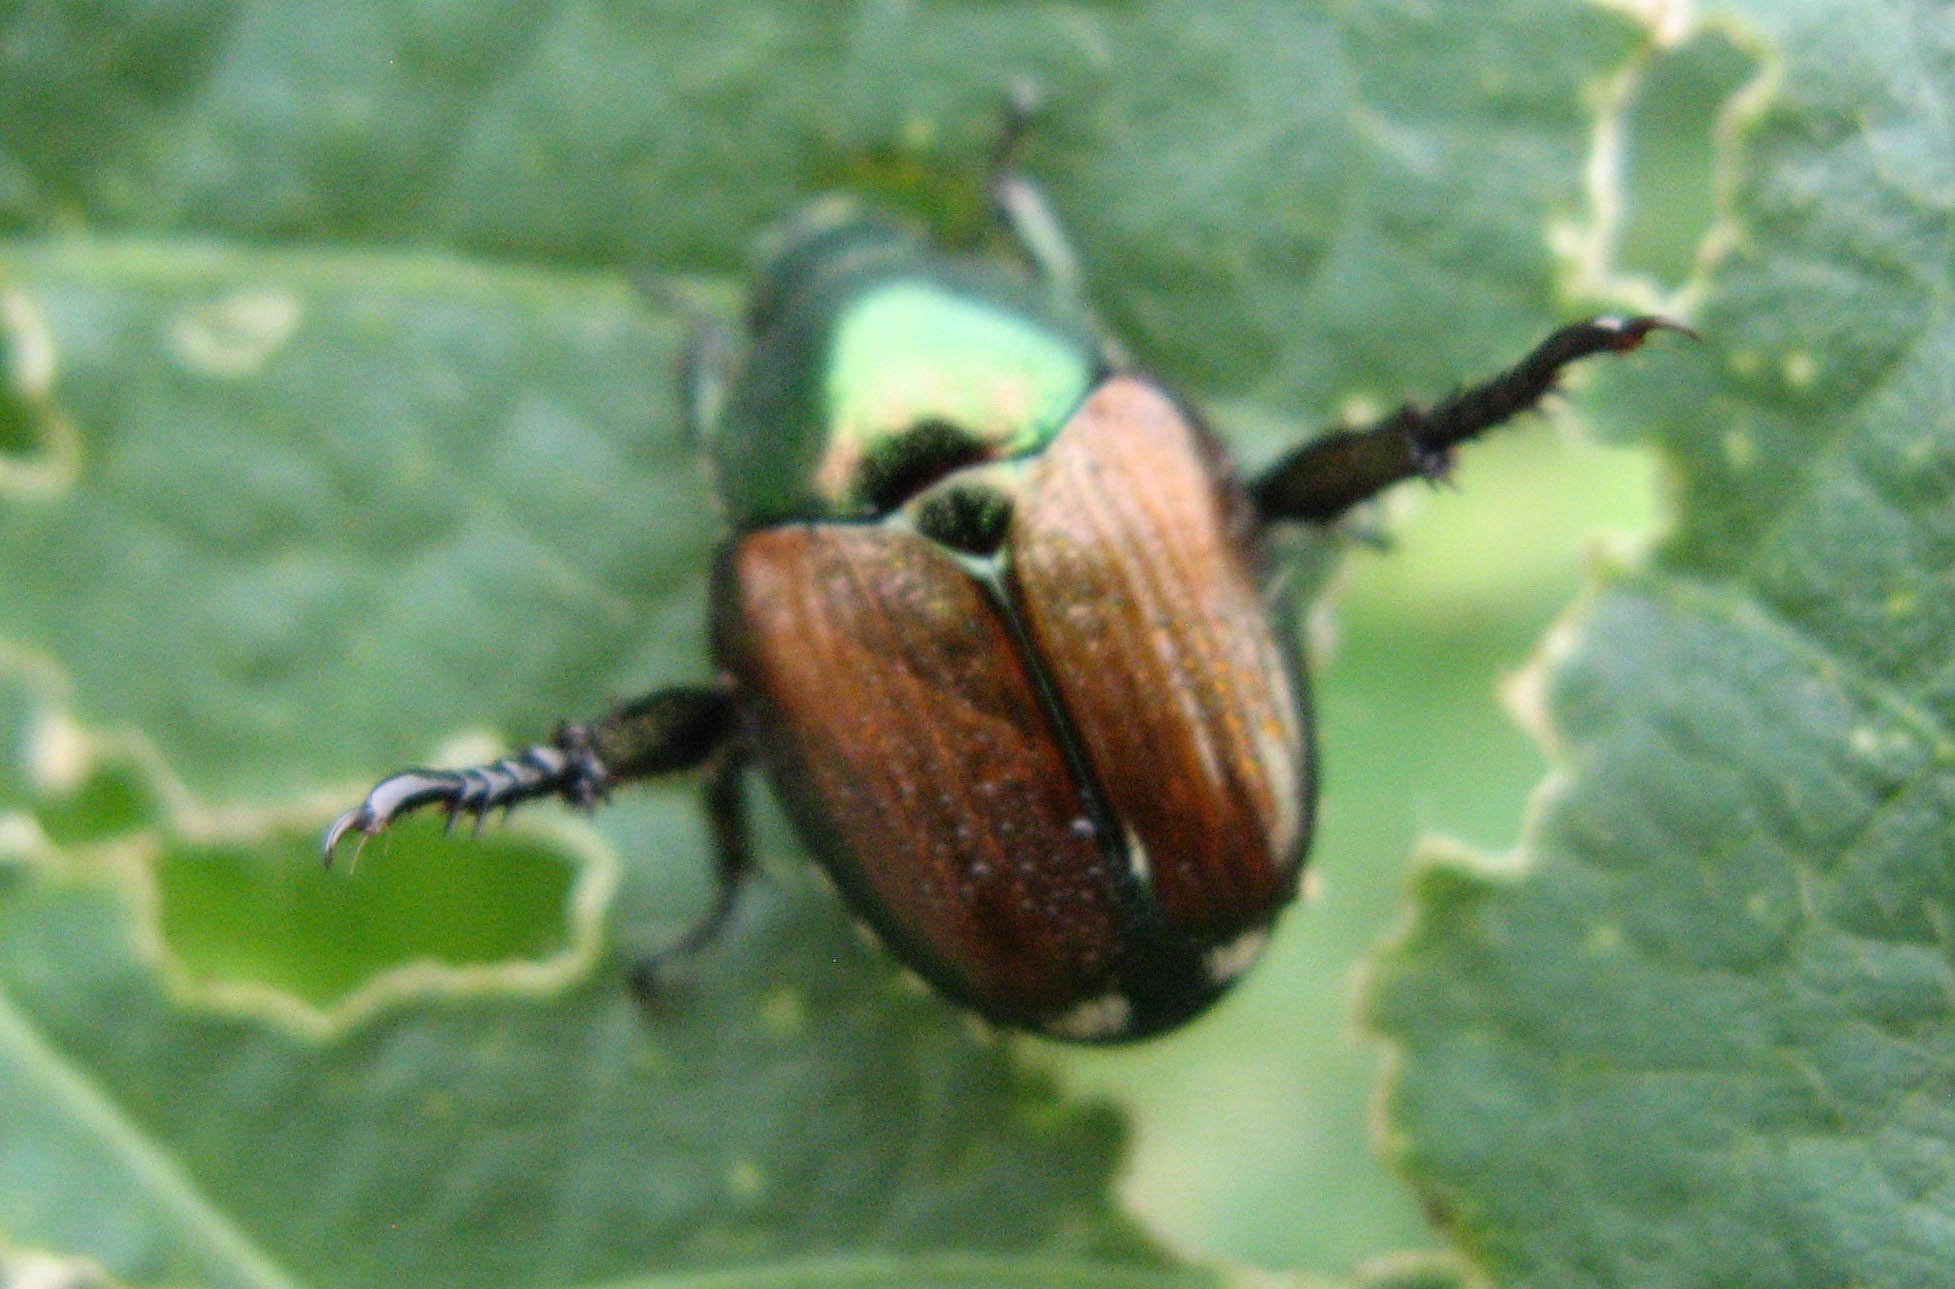 beetle with metallic green head and red wings resting on soybean leaf